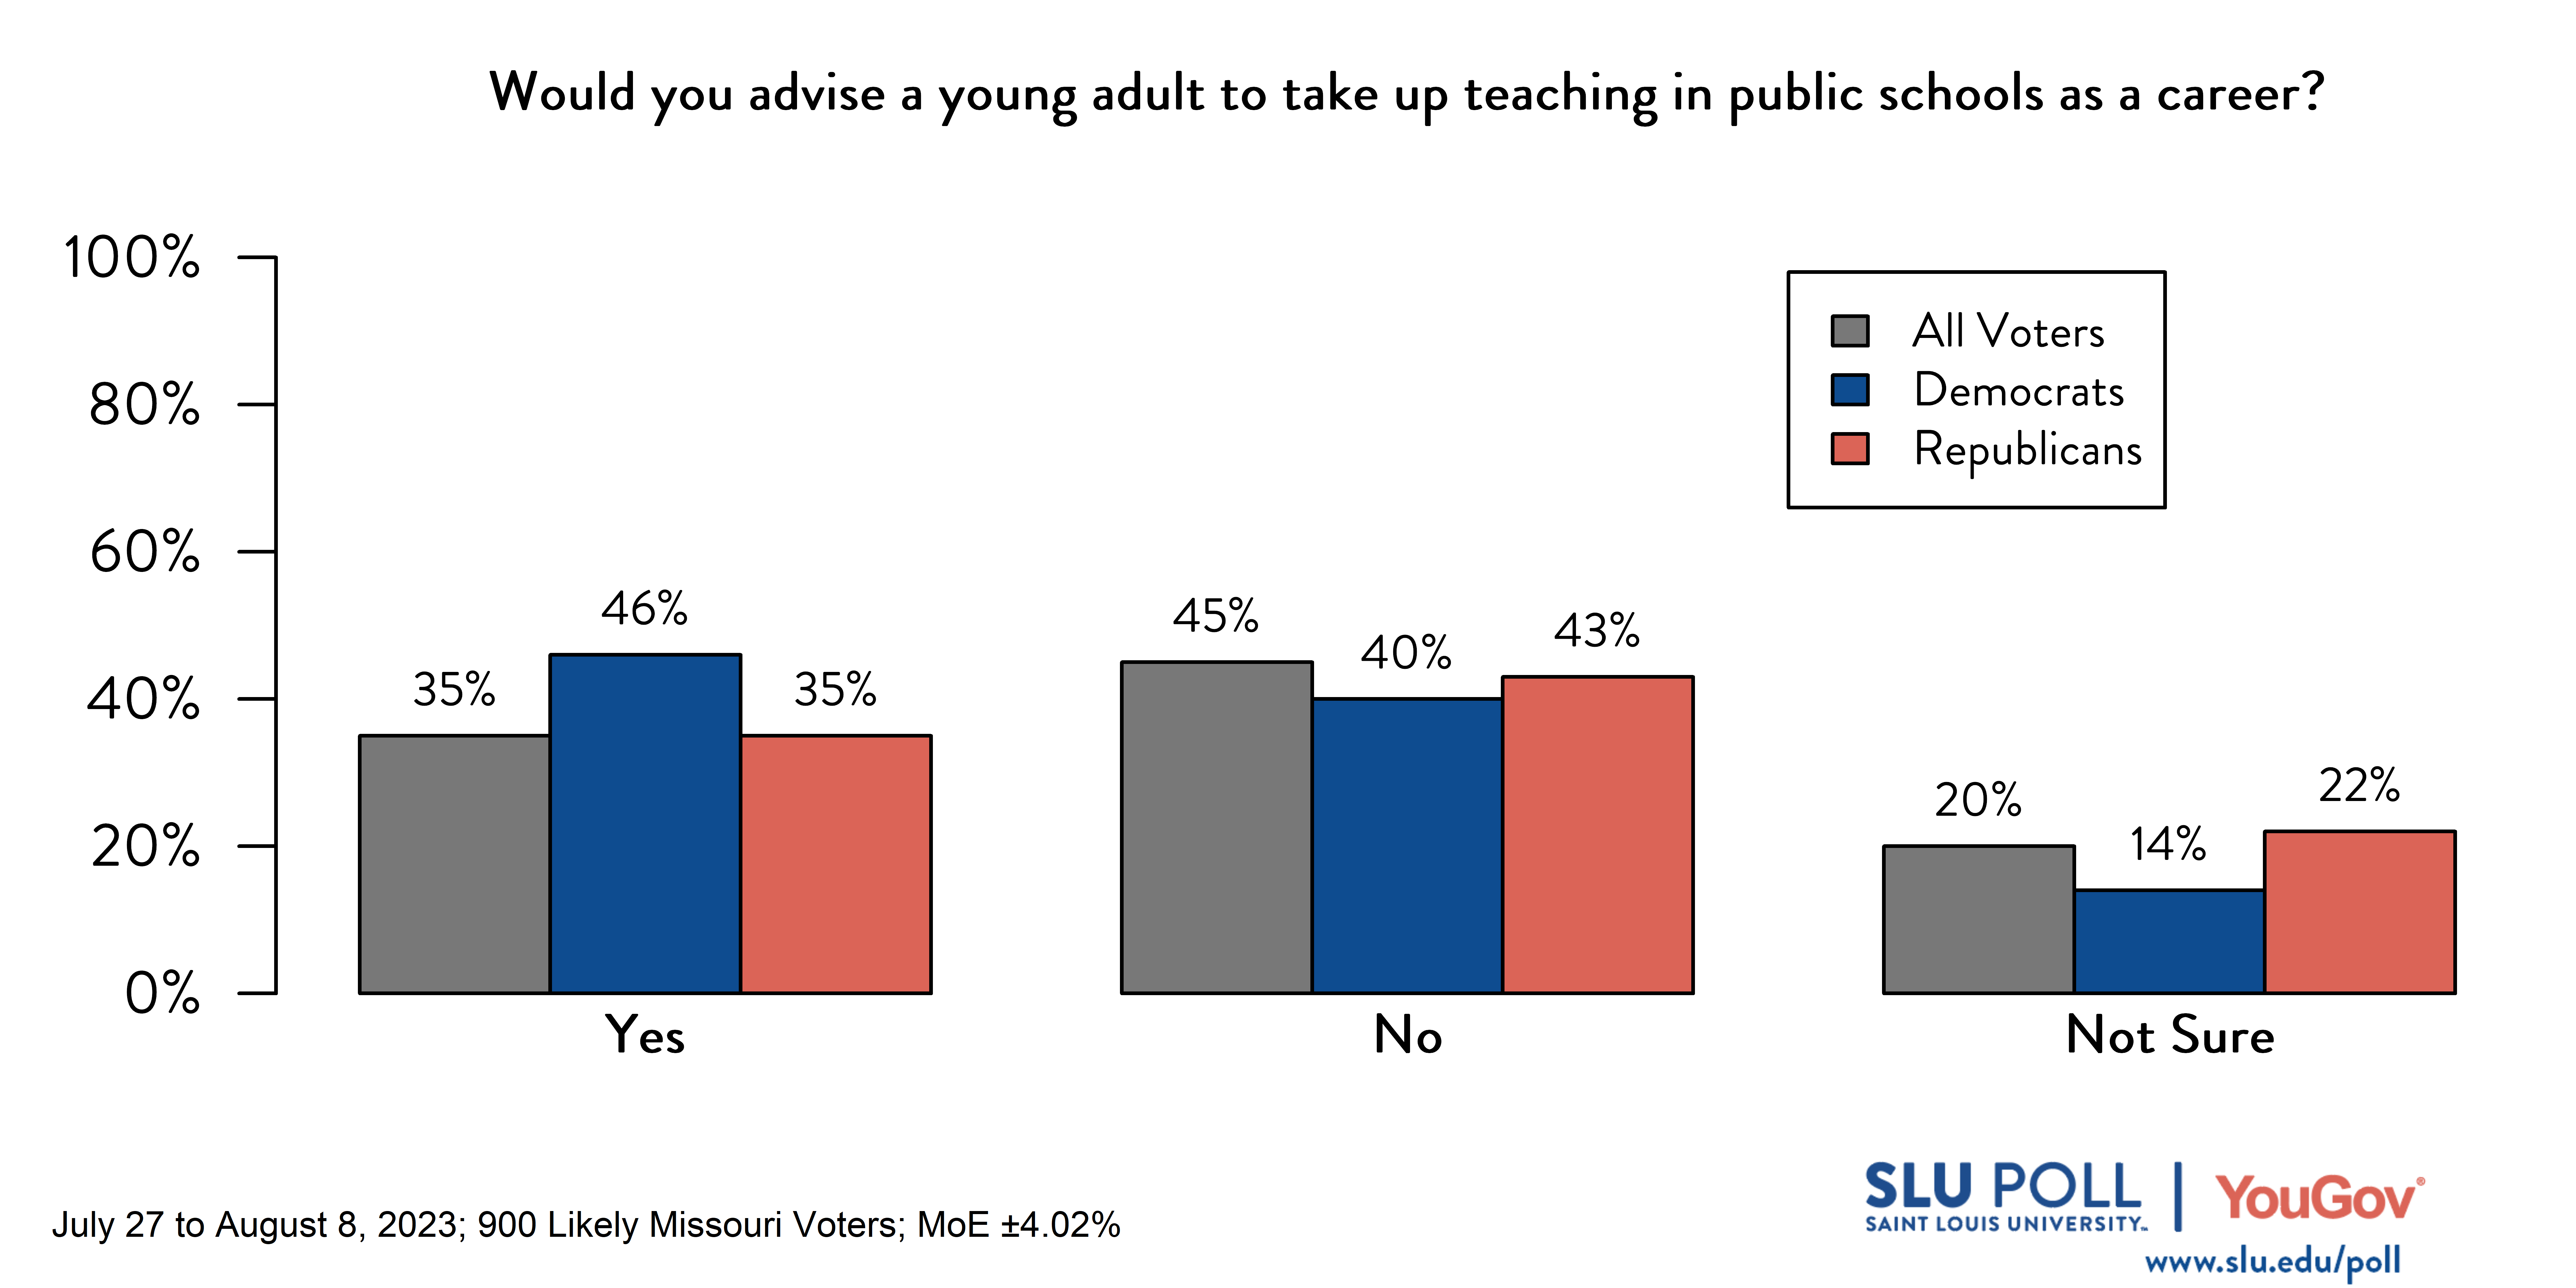 Likely voters' responses to 'Would you advise a young adult to take up teaching in public schools as a career?': 35% Yes, 45% No, and 20% Not sure. Democratic voters' responses: ' 46% Yes, 40% No, and 14% Not sure. Republican voters' responses: 35% Yes, 43% No, and 22% Not sure.